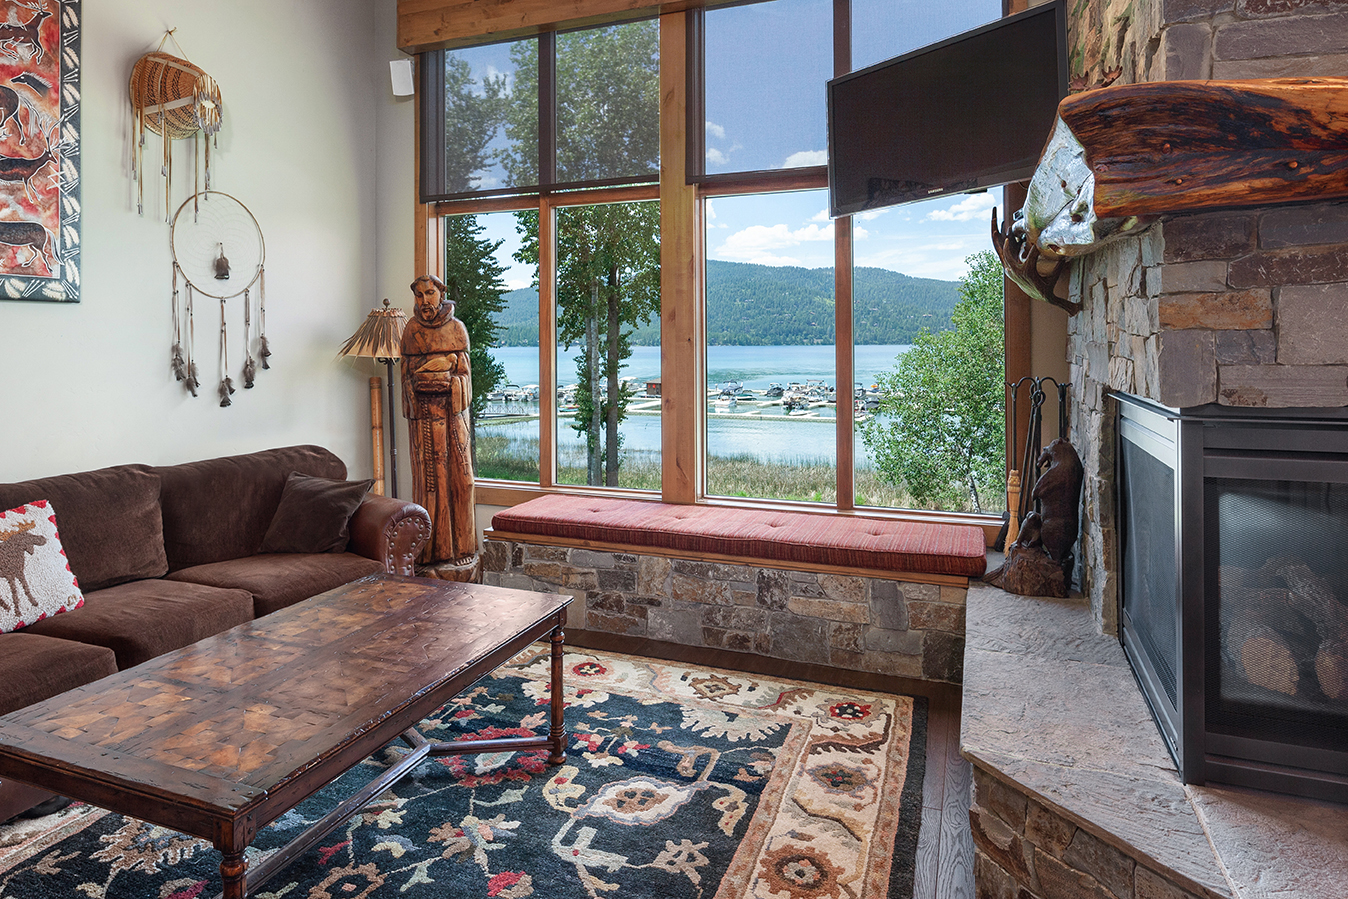 The Big Sky Suite offers two Great Rooms each with stunning views of Whitefish Lake. – Lindsay Goudreau